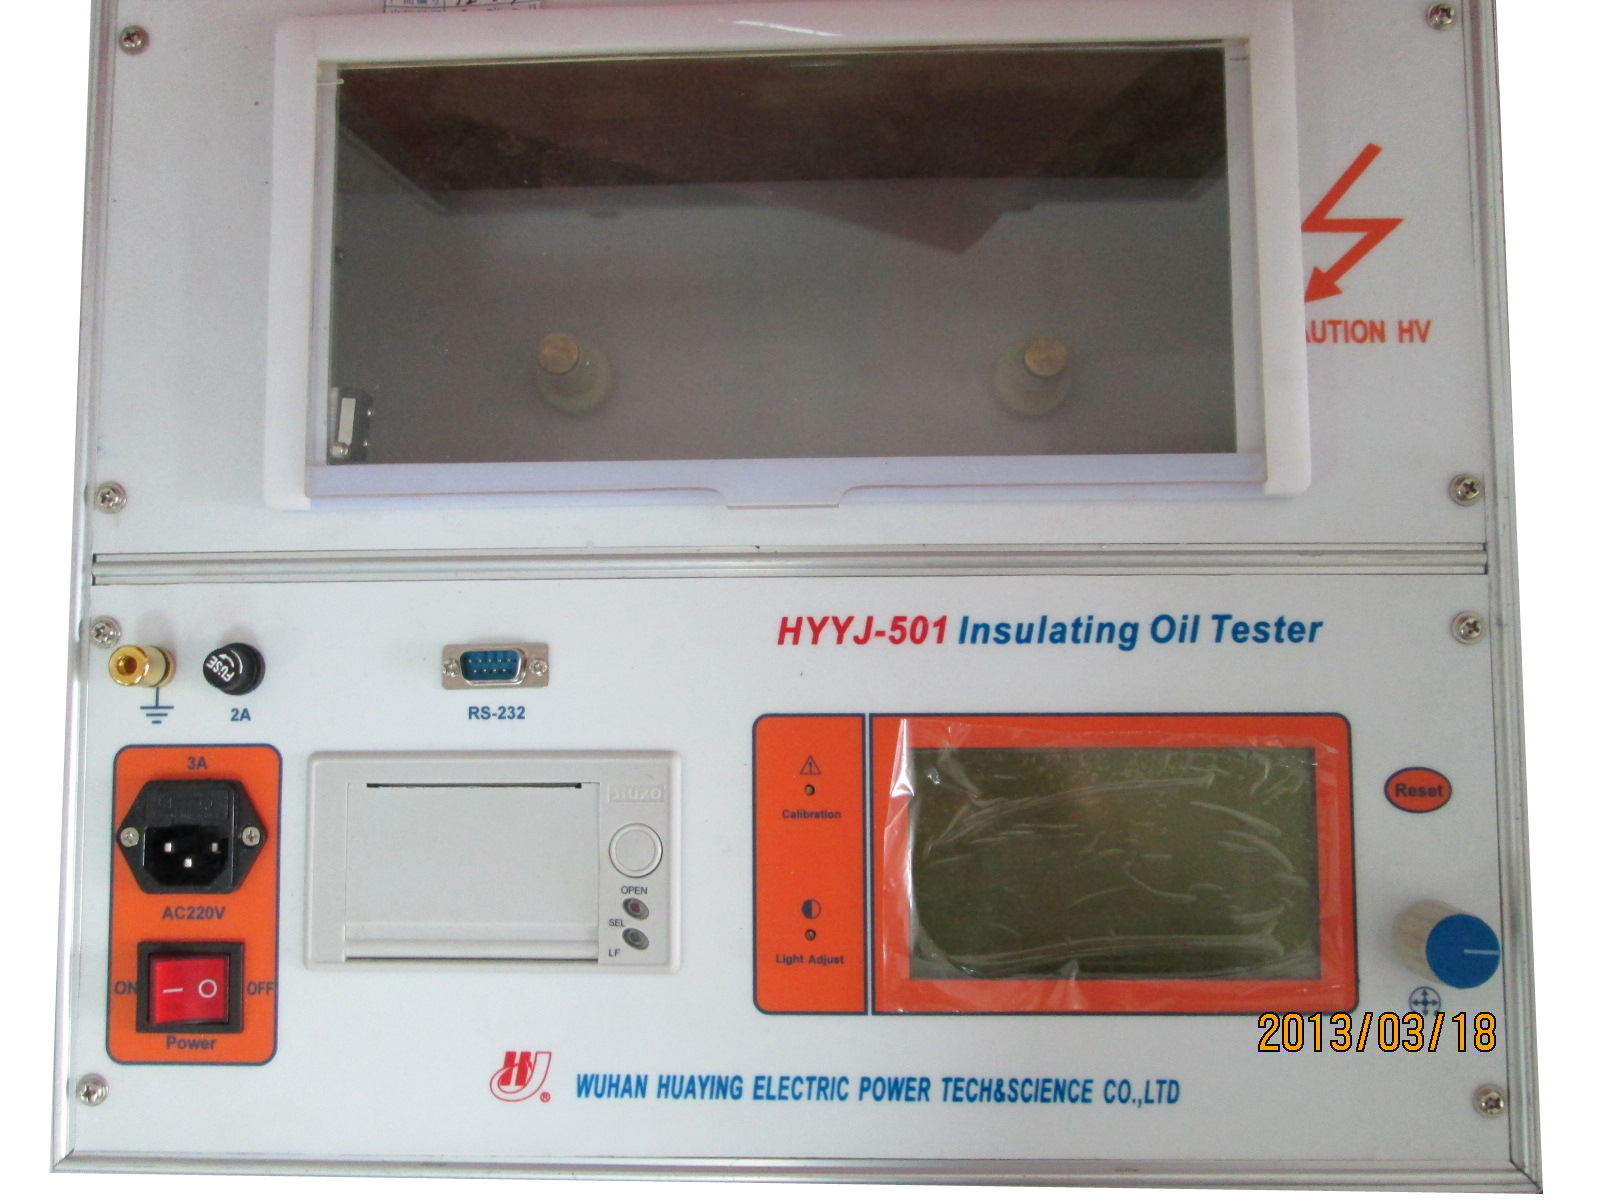 HYYJ-501 insulating oil tester